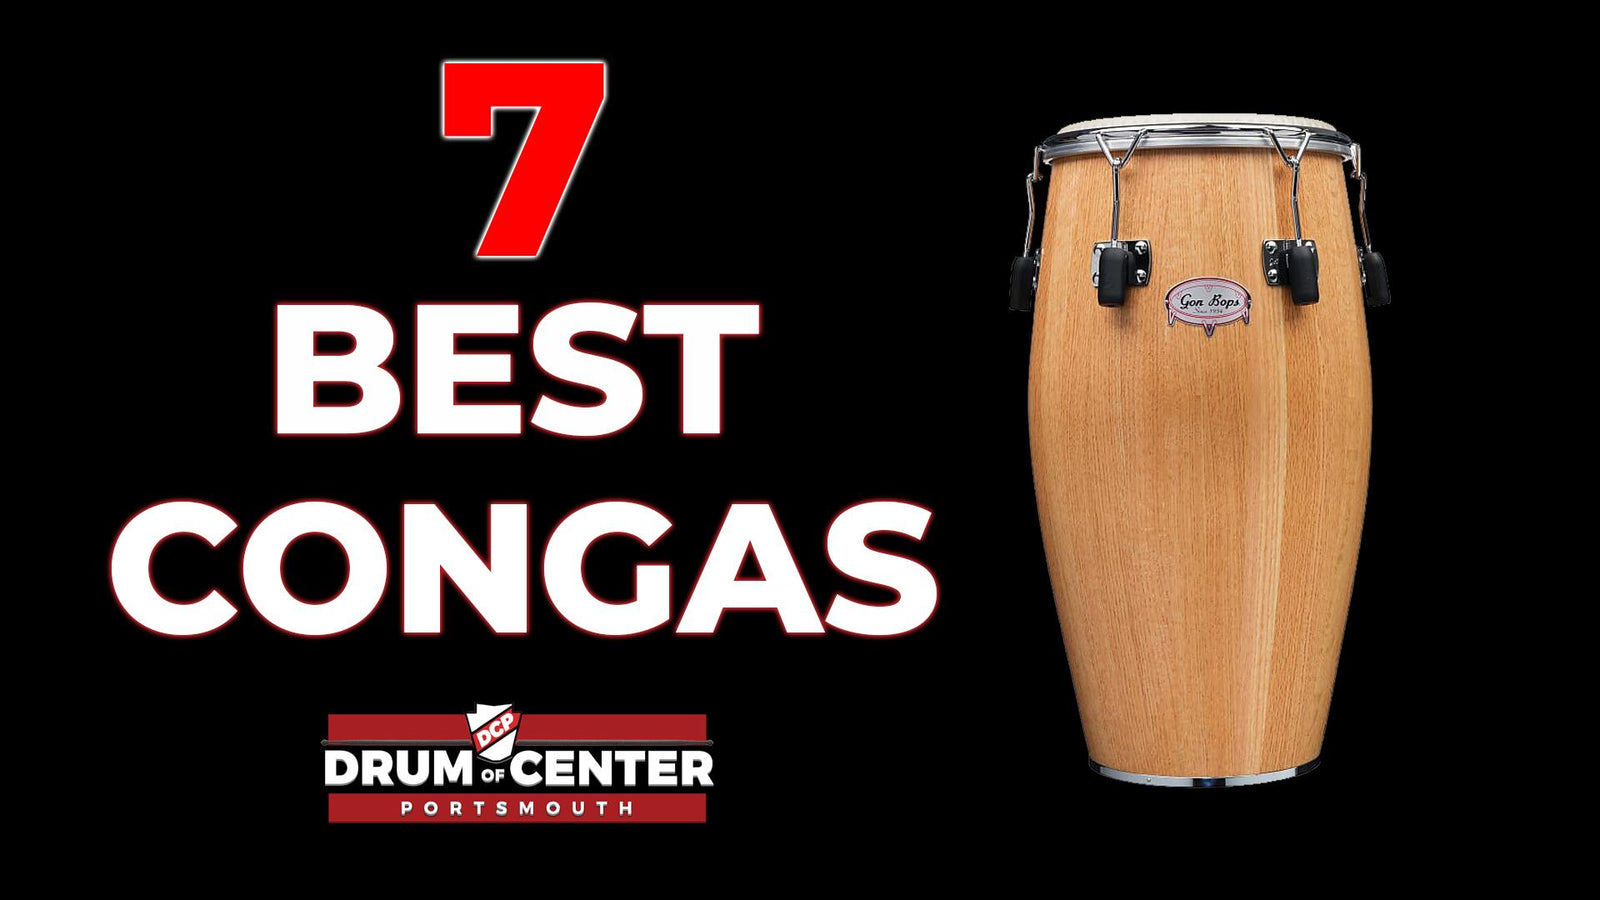 7 Best Congas in 2022 Reviewed